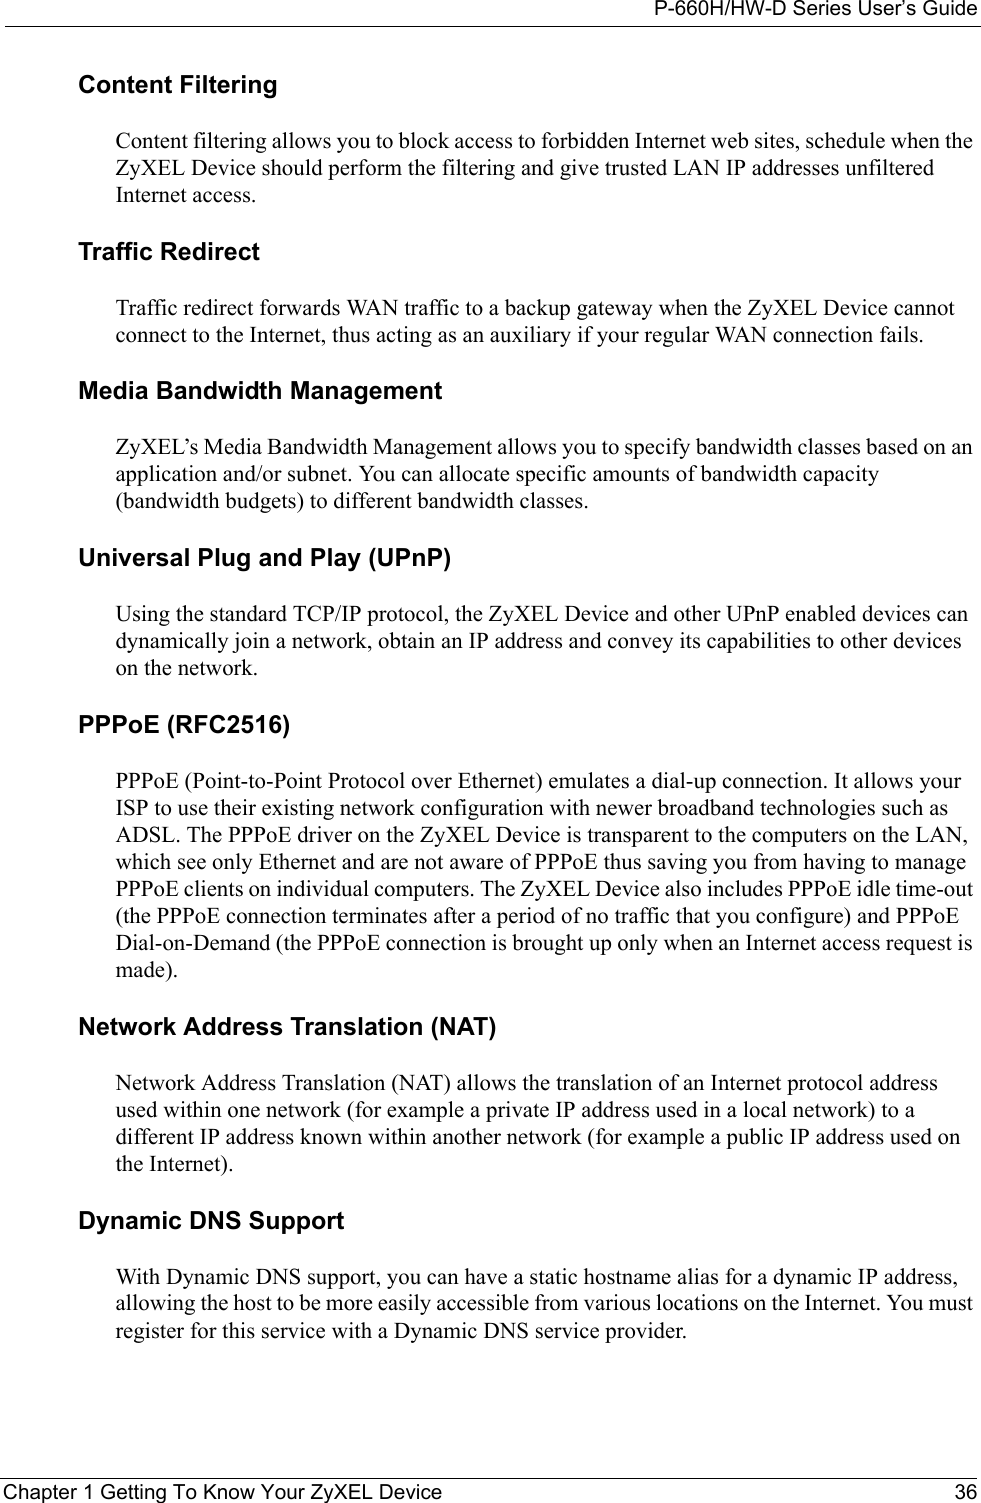 P-660H/HW-D Series User’s GuideChapter 1 Getting To Know Your ZyXEL Device 36Content FilteringContent filtering allows you to block access to forbidden Internet web sites, schedule when the ZyXEL Device should perform the filtering and give trusted LAN IP addresses unfiltered Internet access.Traffic RedirectTraffic redirect forwards WAN traffic to a backup gateway when the ZyXEL Device cannot connect to the Internet, thus acting as an auxiliary if your regular WAN connection fails.Media Bandwidth ManagementZyXEL’s Media Bandwidth Management allows you to specify bandwidth classes based on an application and/or subnet. You can allocate specific amounts of bandwidth capacity (bandwidth budgets) to different bandwidth classes. Universal Plug and Play (UPnP)Using the standard TCP/IP protocol, the ZyXEL Device and other UPnP enabled devices can dynamically join a network, obtain an IP address and convey its capabilities to other devices on the network.PPPoE (RFC2516)PPPoE (Point-to-Point Protocol over Ethernet) emulates a dial-up connection. It allows your ISP to use their existing network configuration with newer broadband technologies such as ADSL. The PPPoE driver on the ZyXEL Device is transparent to the computers on the LAN, which see only Ethernet and are not aware of PPPoE thus saving you from having to manage PPPoE clients on individual computers. The ZyXEL Device also includes PPPoE idle time-out (the PPPoE connection terminates after a period of no traffic that you configure) and PPPoE Dial-on-Demand (the PPPoE connection is brought up only when an Internet access request is made).Network Address Translation (NAT)Network Address Translation (NAT) allows the translation of an Internet protocol address used within one network (for example a private IP address used in a local network) to a different IP address known within another network (for example a public IP address used on the Internet).Dynamic DNS SupportWith Dynamic DNS support, you can have a static hostname alias for a dynamic IP address, allowing the host to be more easily accessible from various locations on the Internet. You must register for this service with a Dynamic DNS service provider.